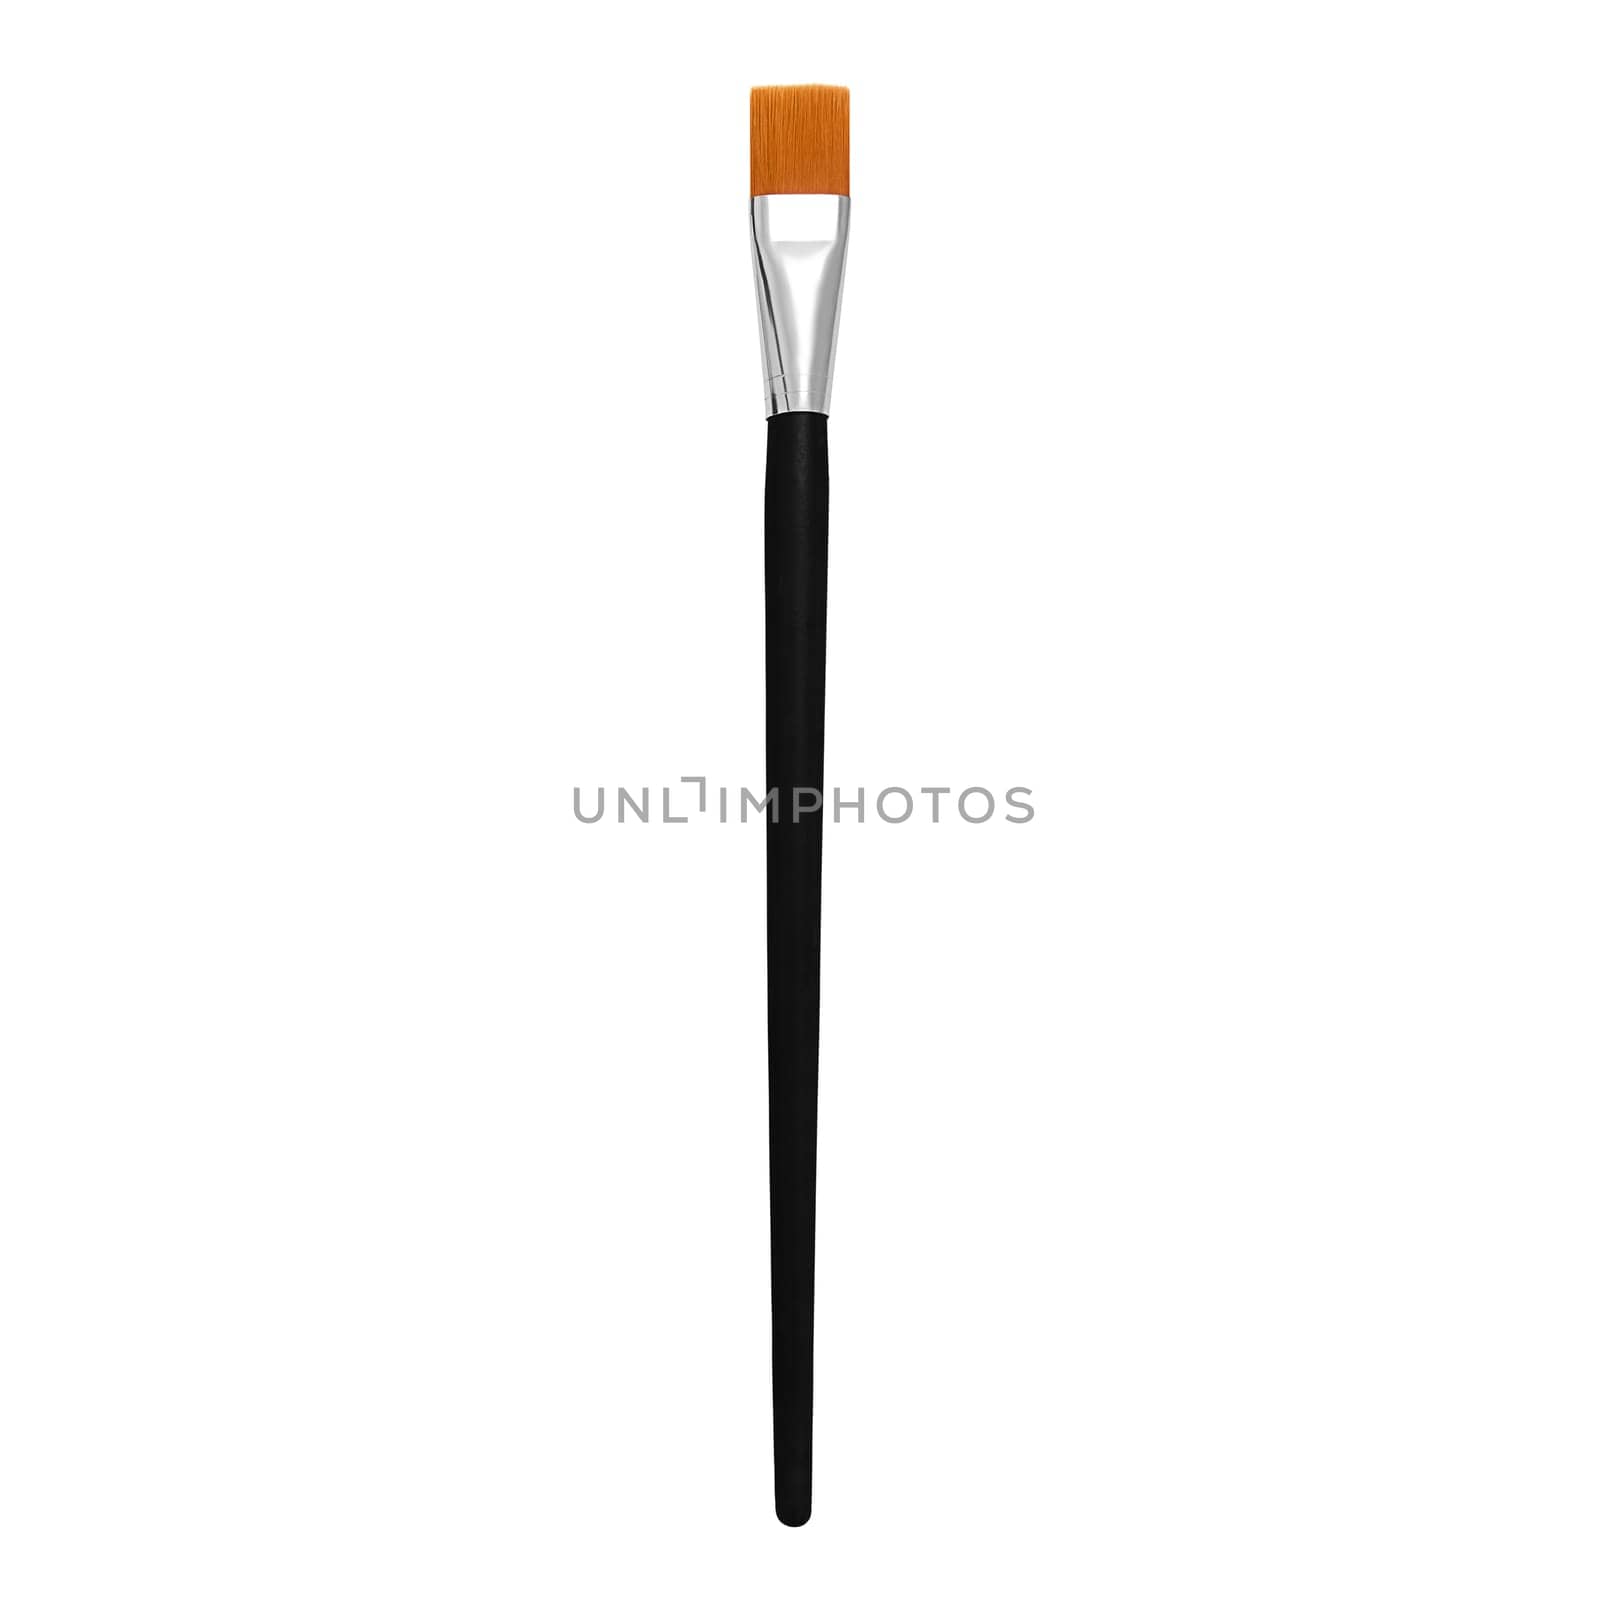 Flat synthetic paint brush isolated on a white background. Stock photo.